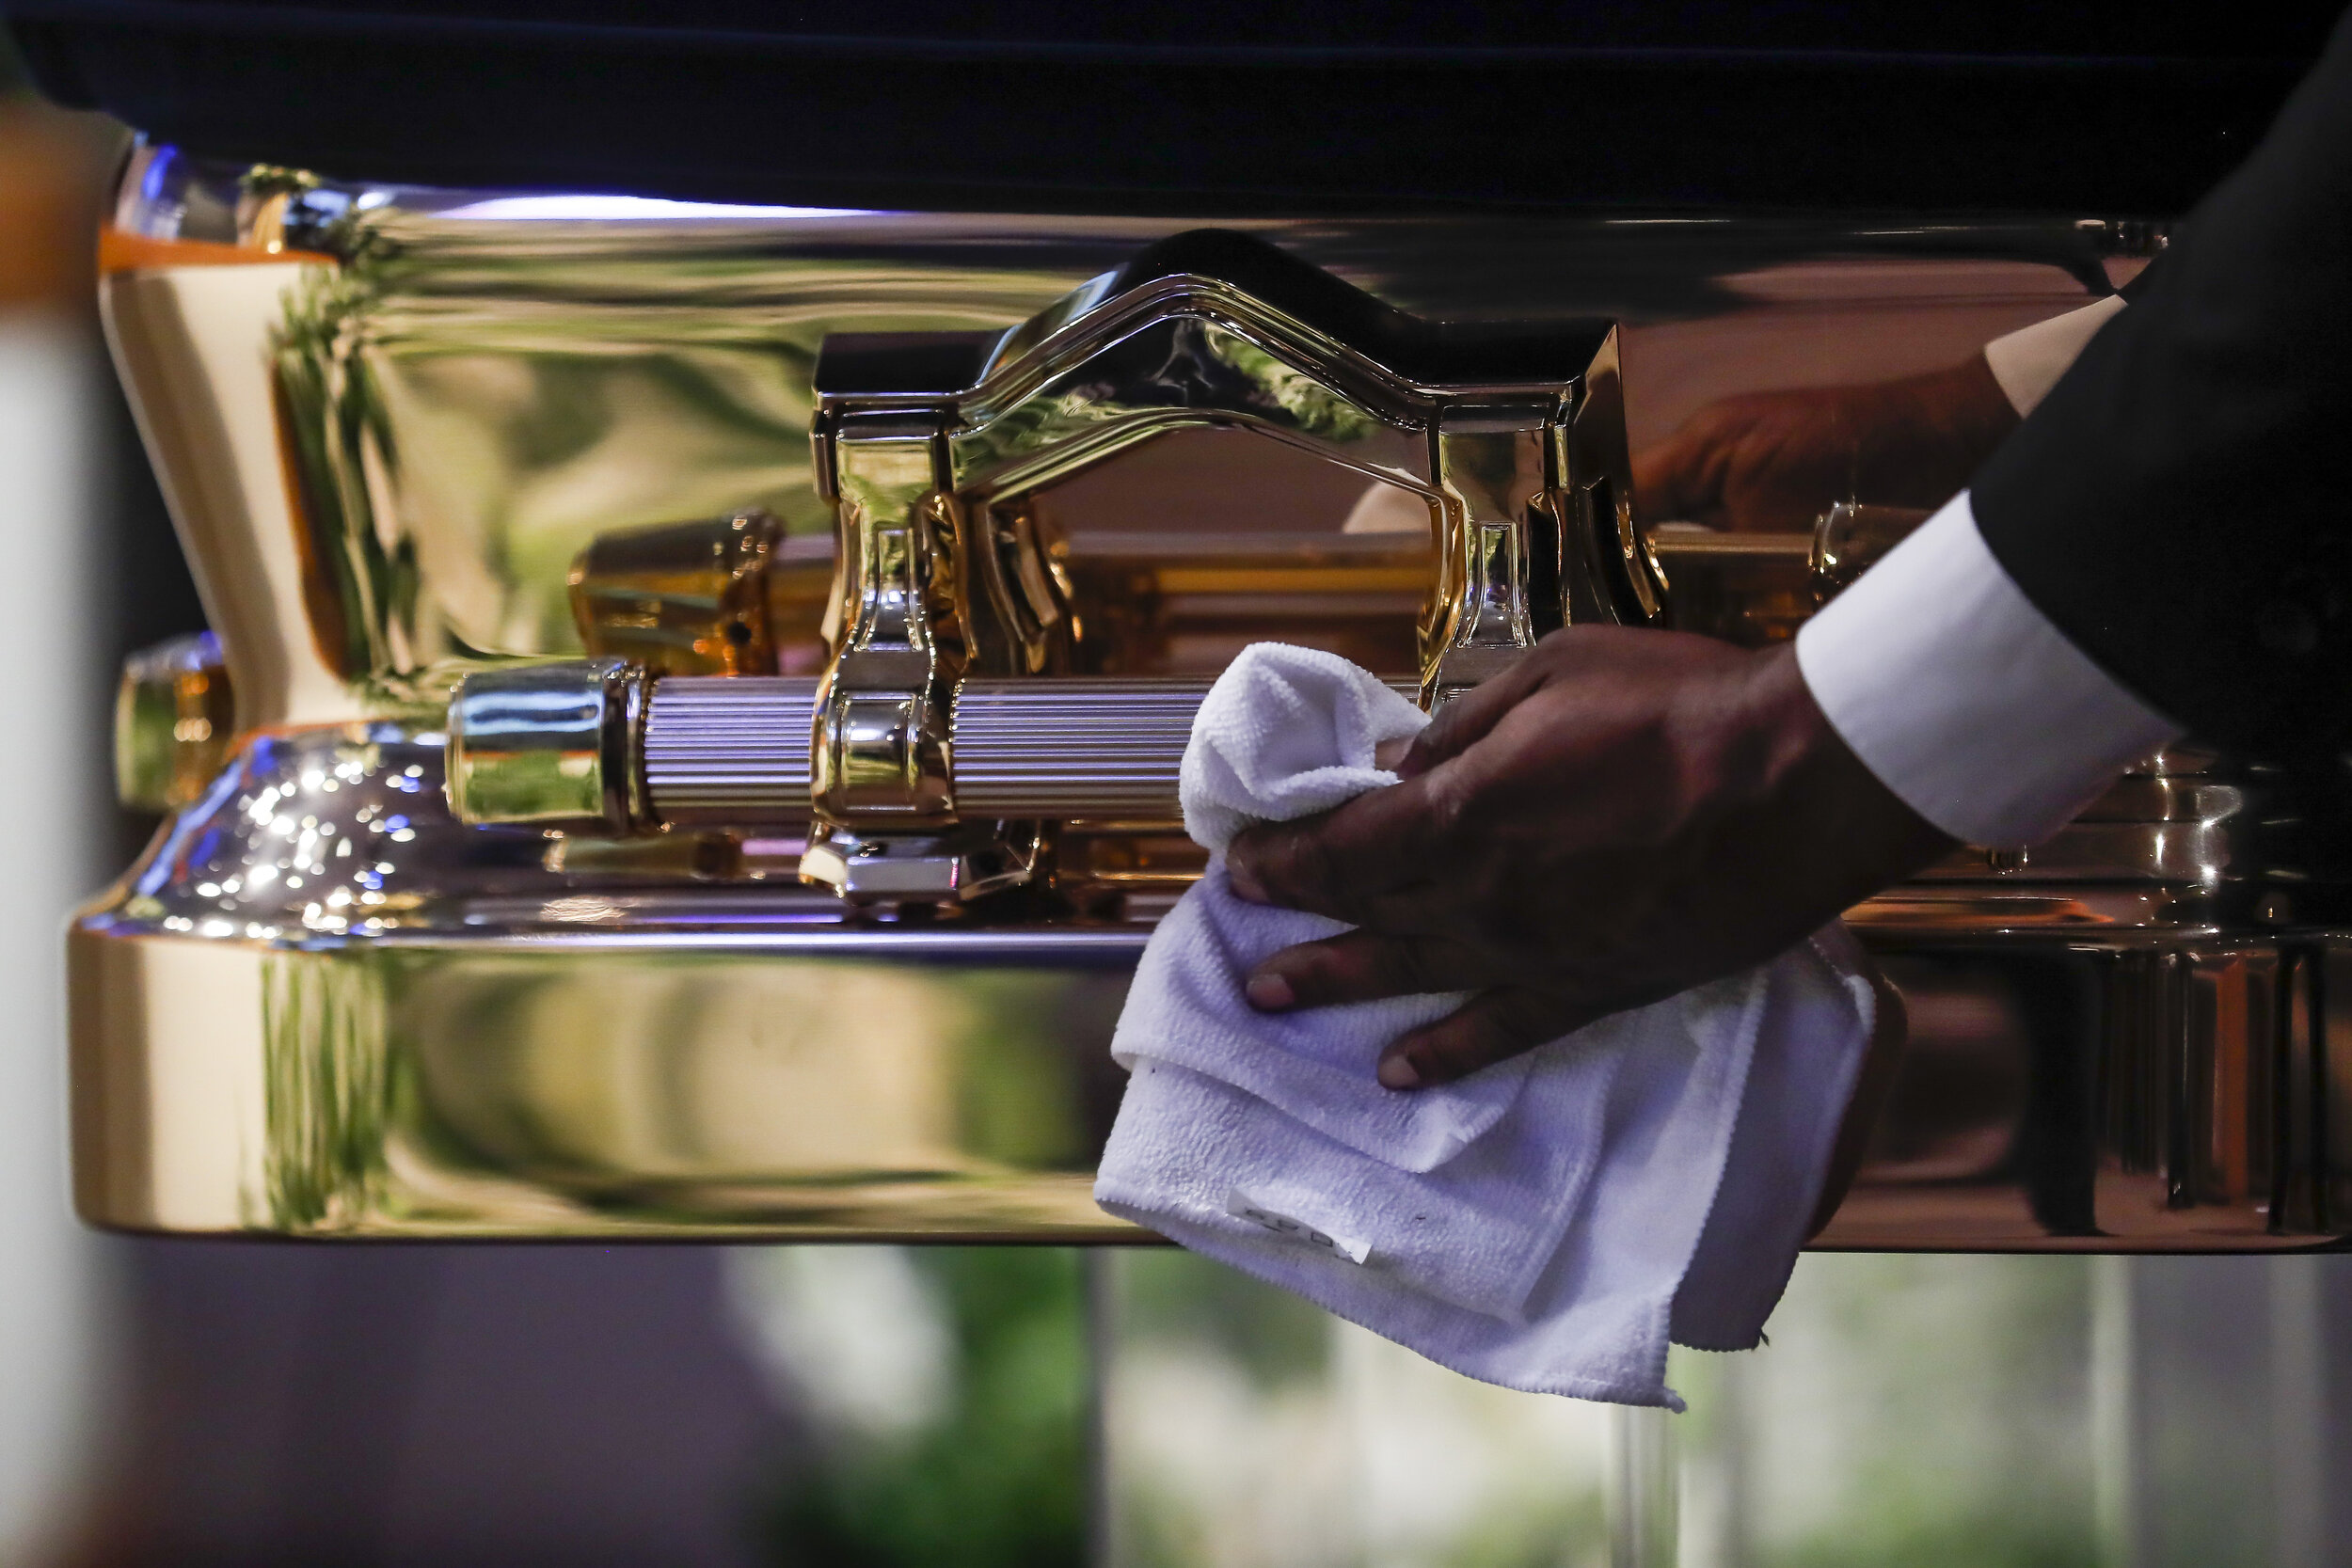  The casket is polished before the funeral for George Floyd at The Fountain of Praise church on Tuesday, June 9, 2020, in Houston, Texas. Floyd died while in custody of the Minneapolis Police Department, after officer Derek Chauvin knelt on his neck 